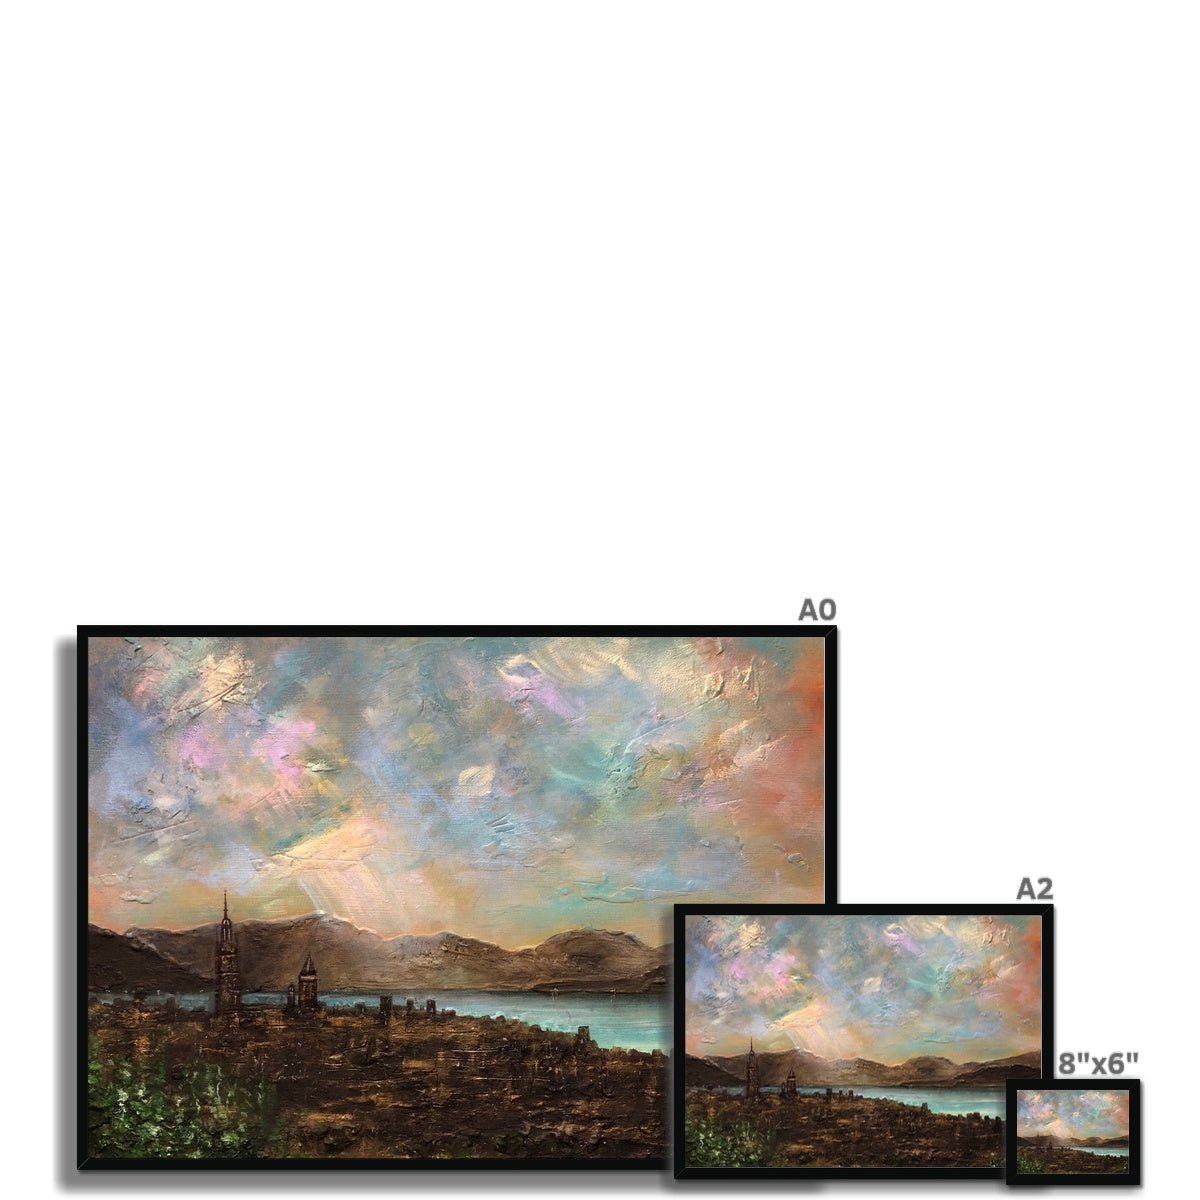 Angels Fingers Over Greenock Painting | Framed Prints From Scotland-Framed Prints-River Clyde Art Gallery-Paintings, Prints, Homeware, Art Gifts From Scotland By Scottish Artist Kevin Hunter